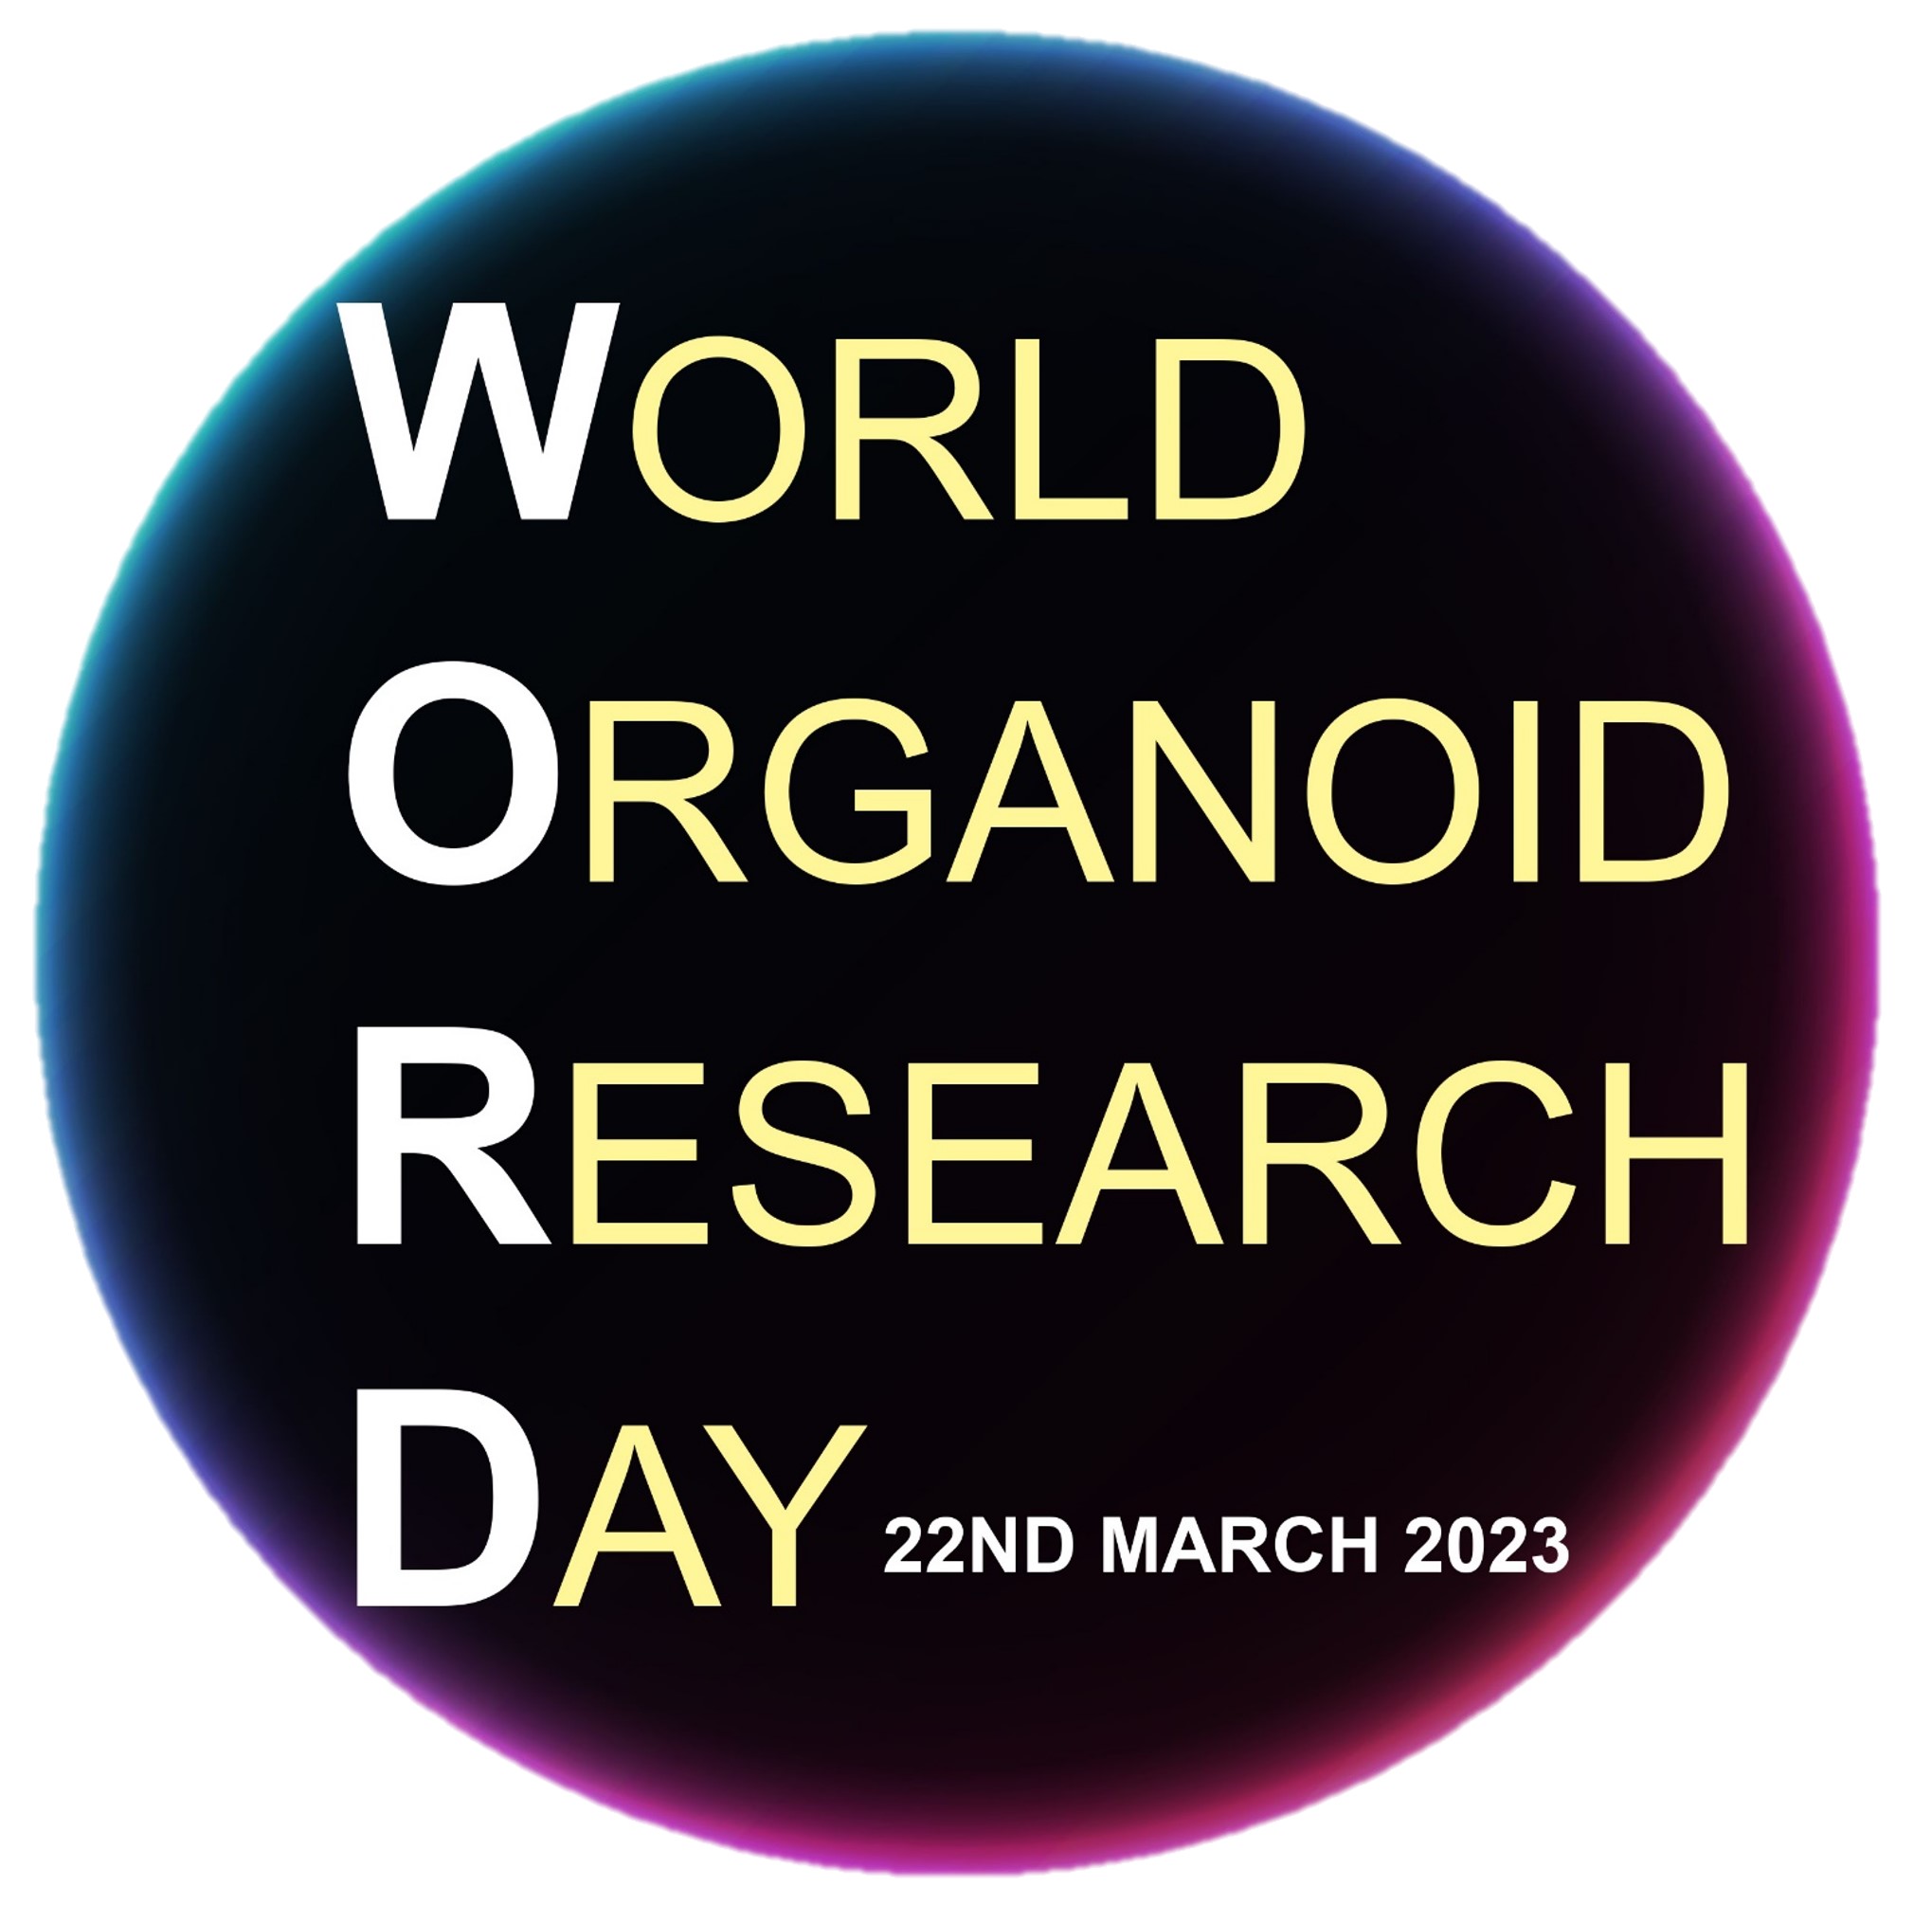 Organoid poster available for download